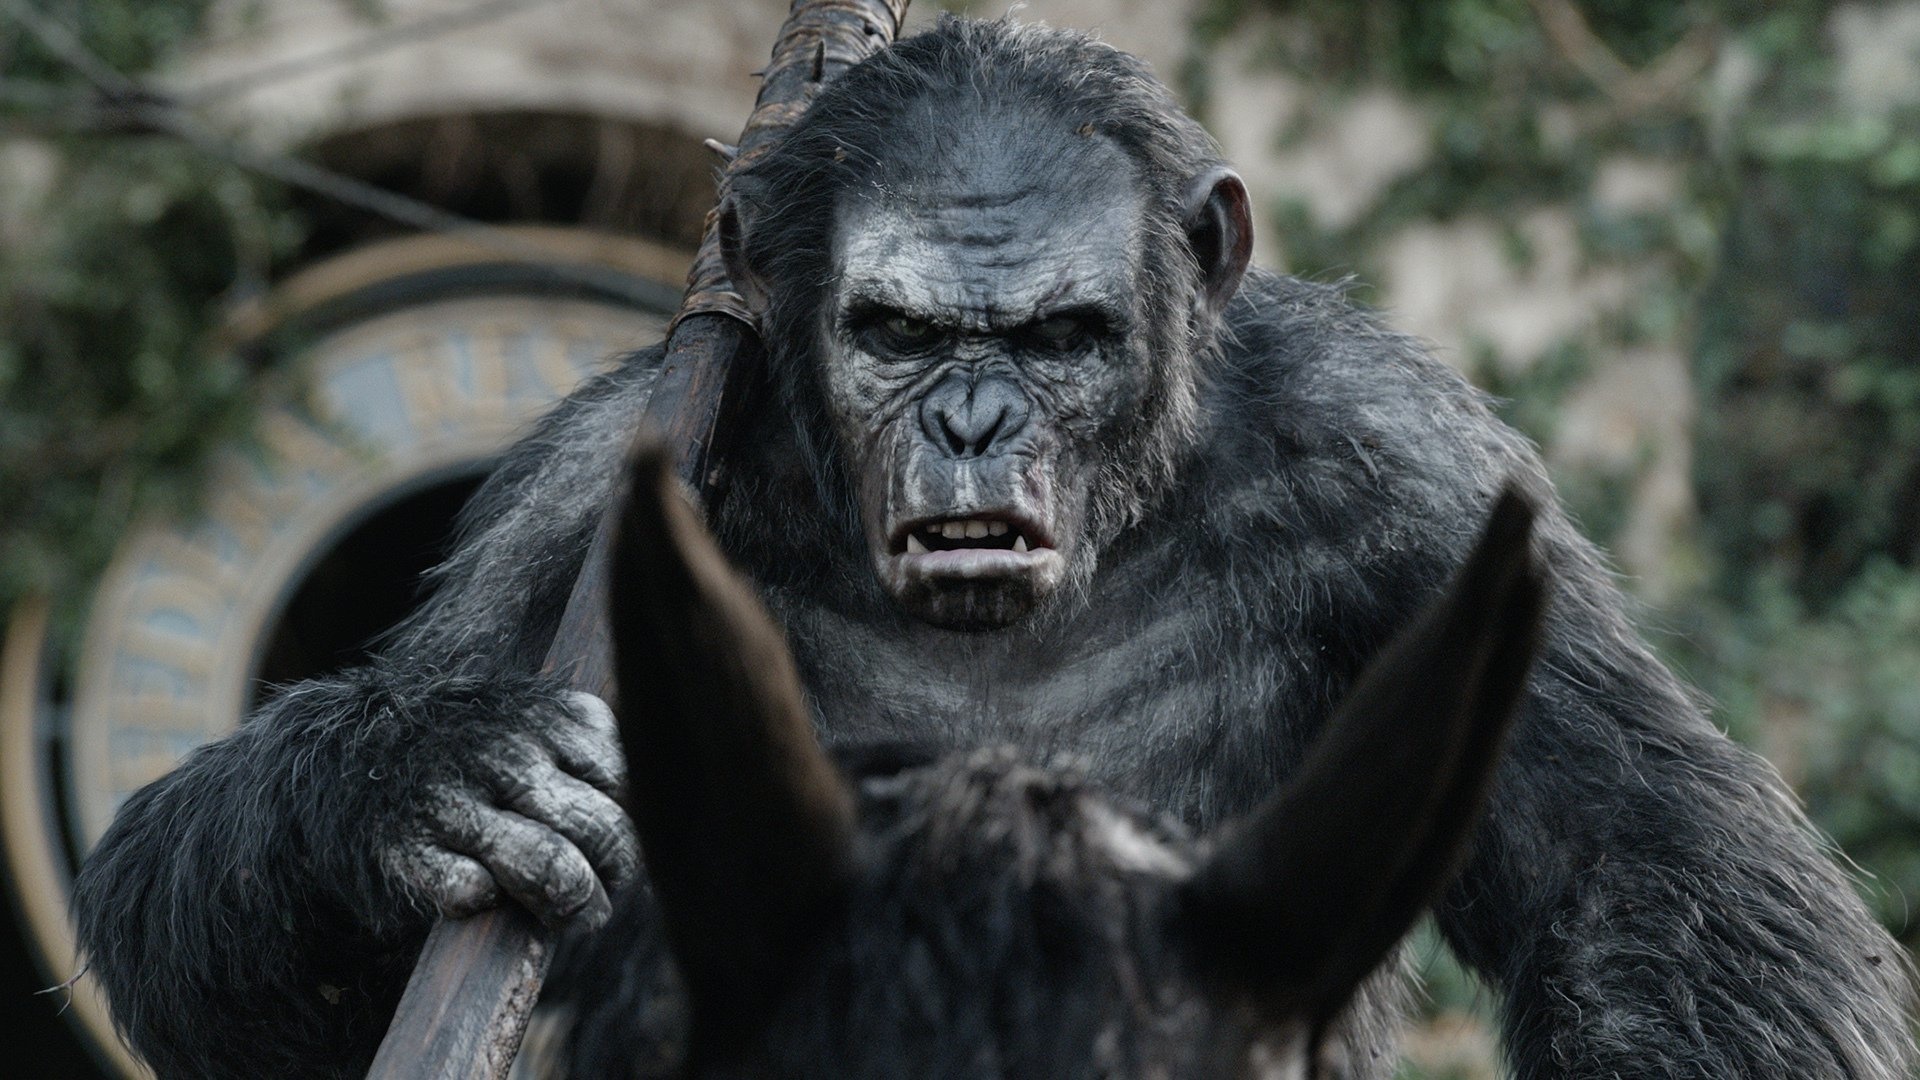 Planet of the Apes, 1920x1080 wallpapers, HD background images, 1920x1080 Full HD Desktop